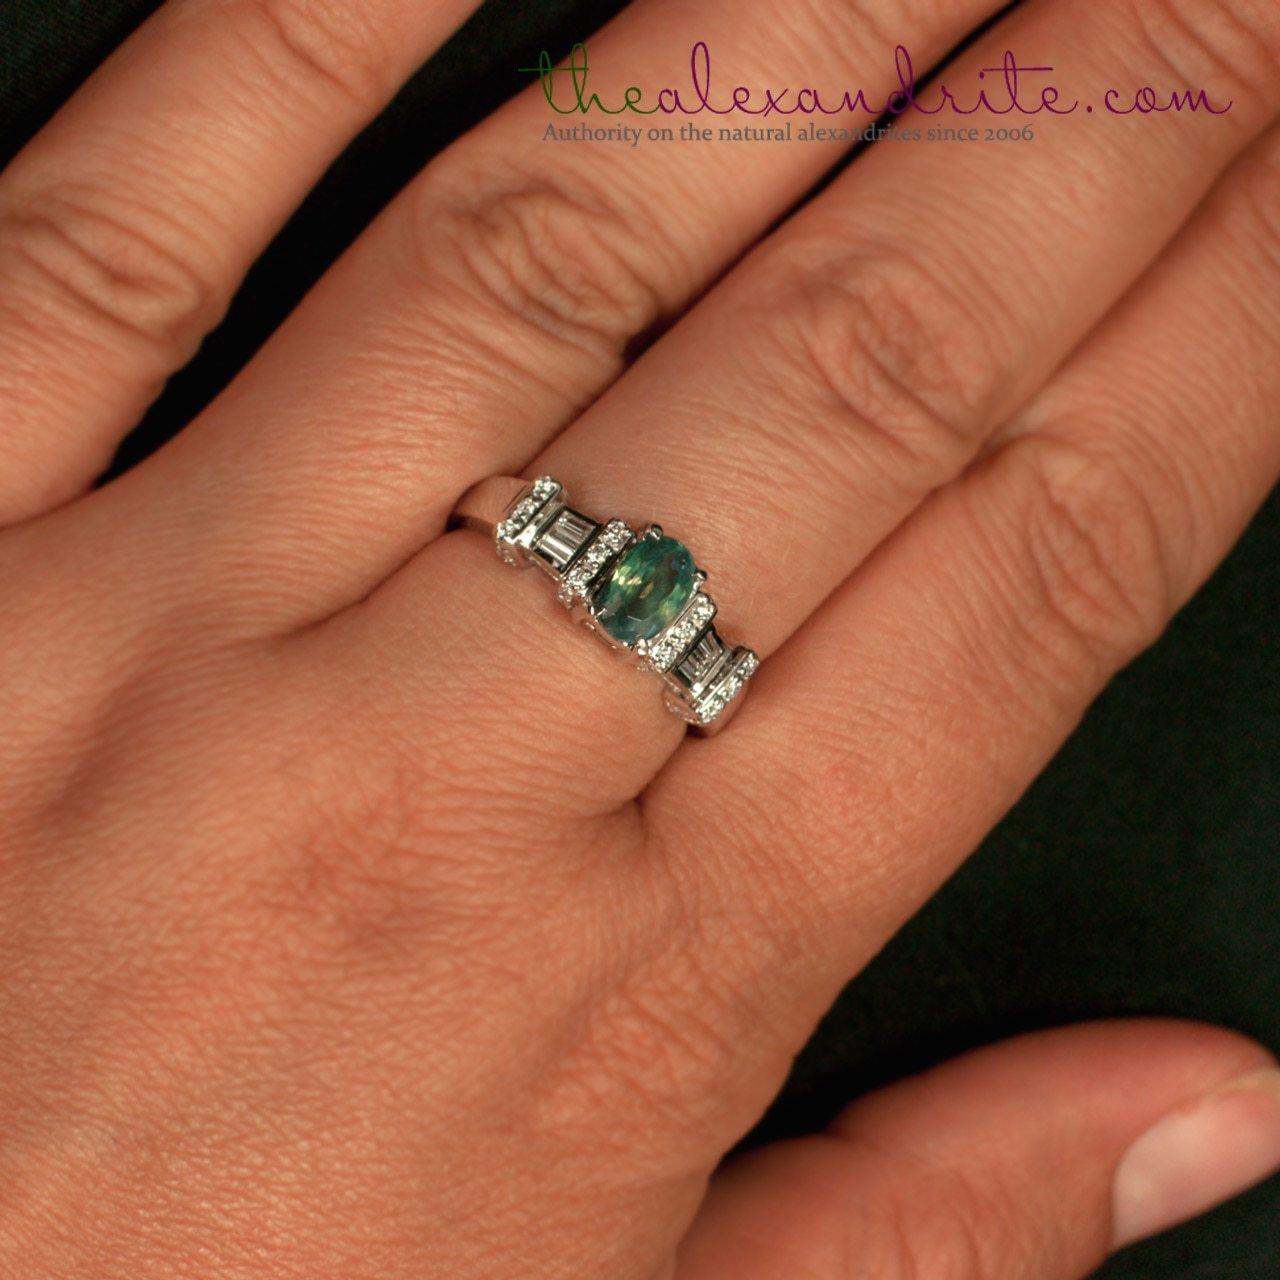 Hand wearing a 1.11ct alexandrite ring in 18K white gold showing green hue